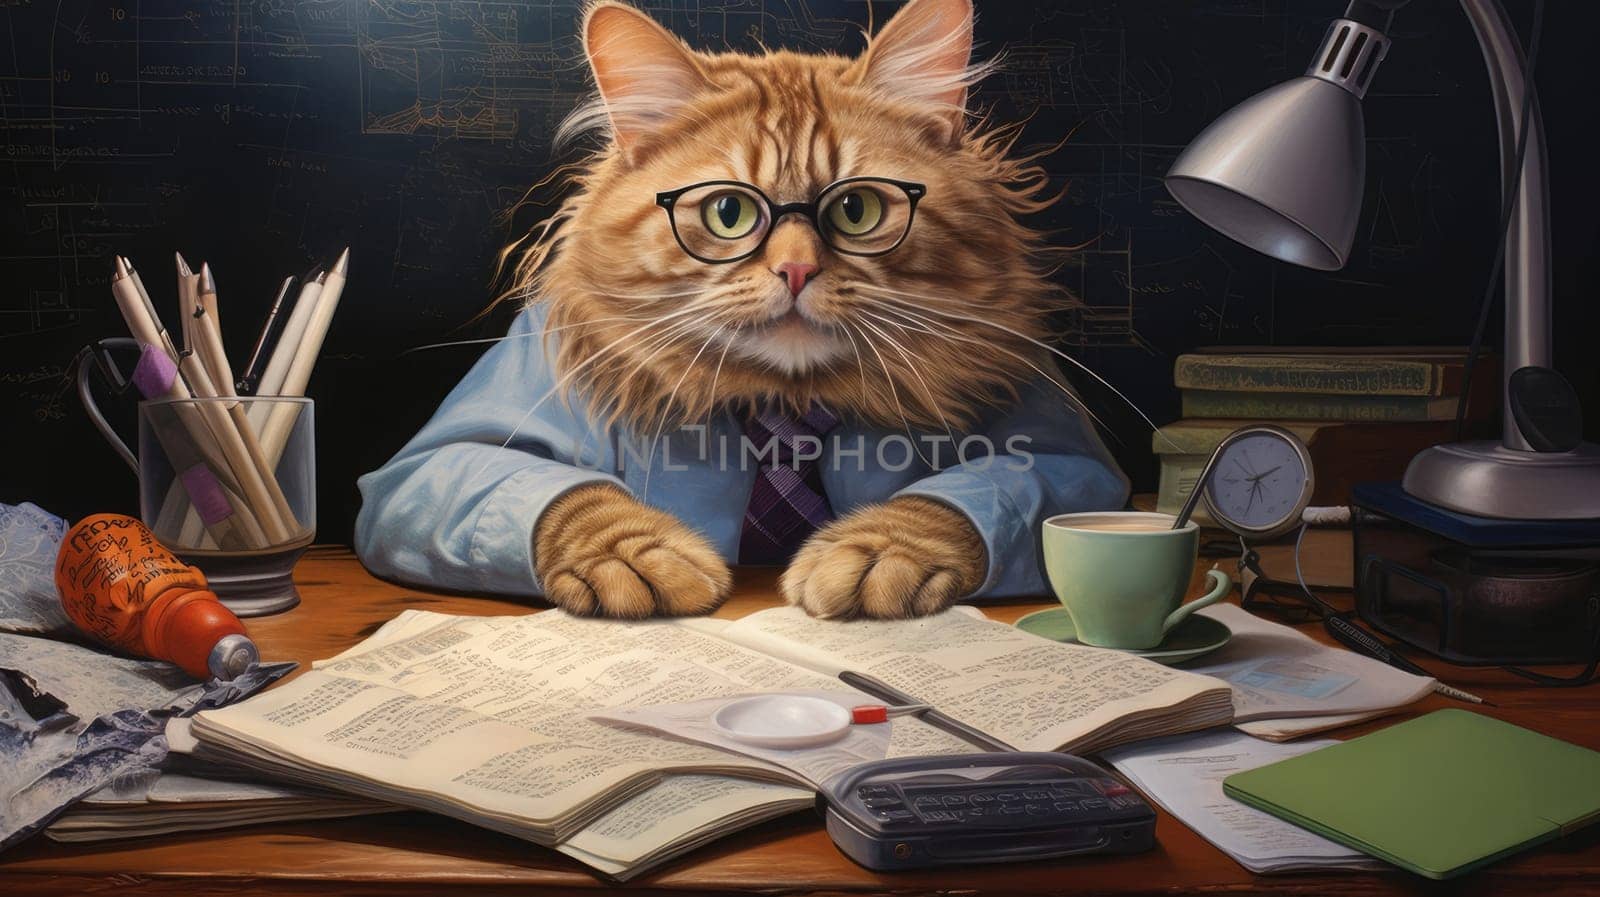 Feline curiosity at work photo realistic illustration - Generative AI. Cat, glasses, tie, table, paper. by simakovavector